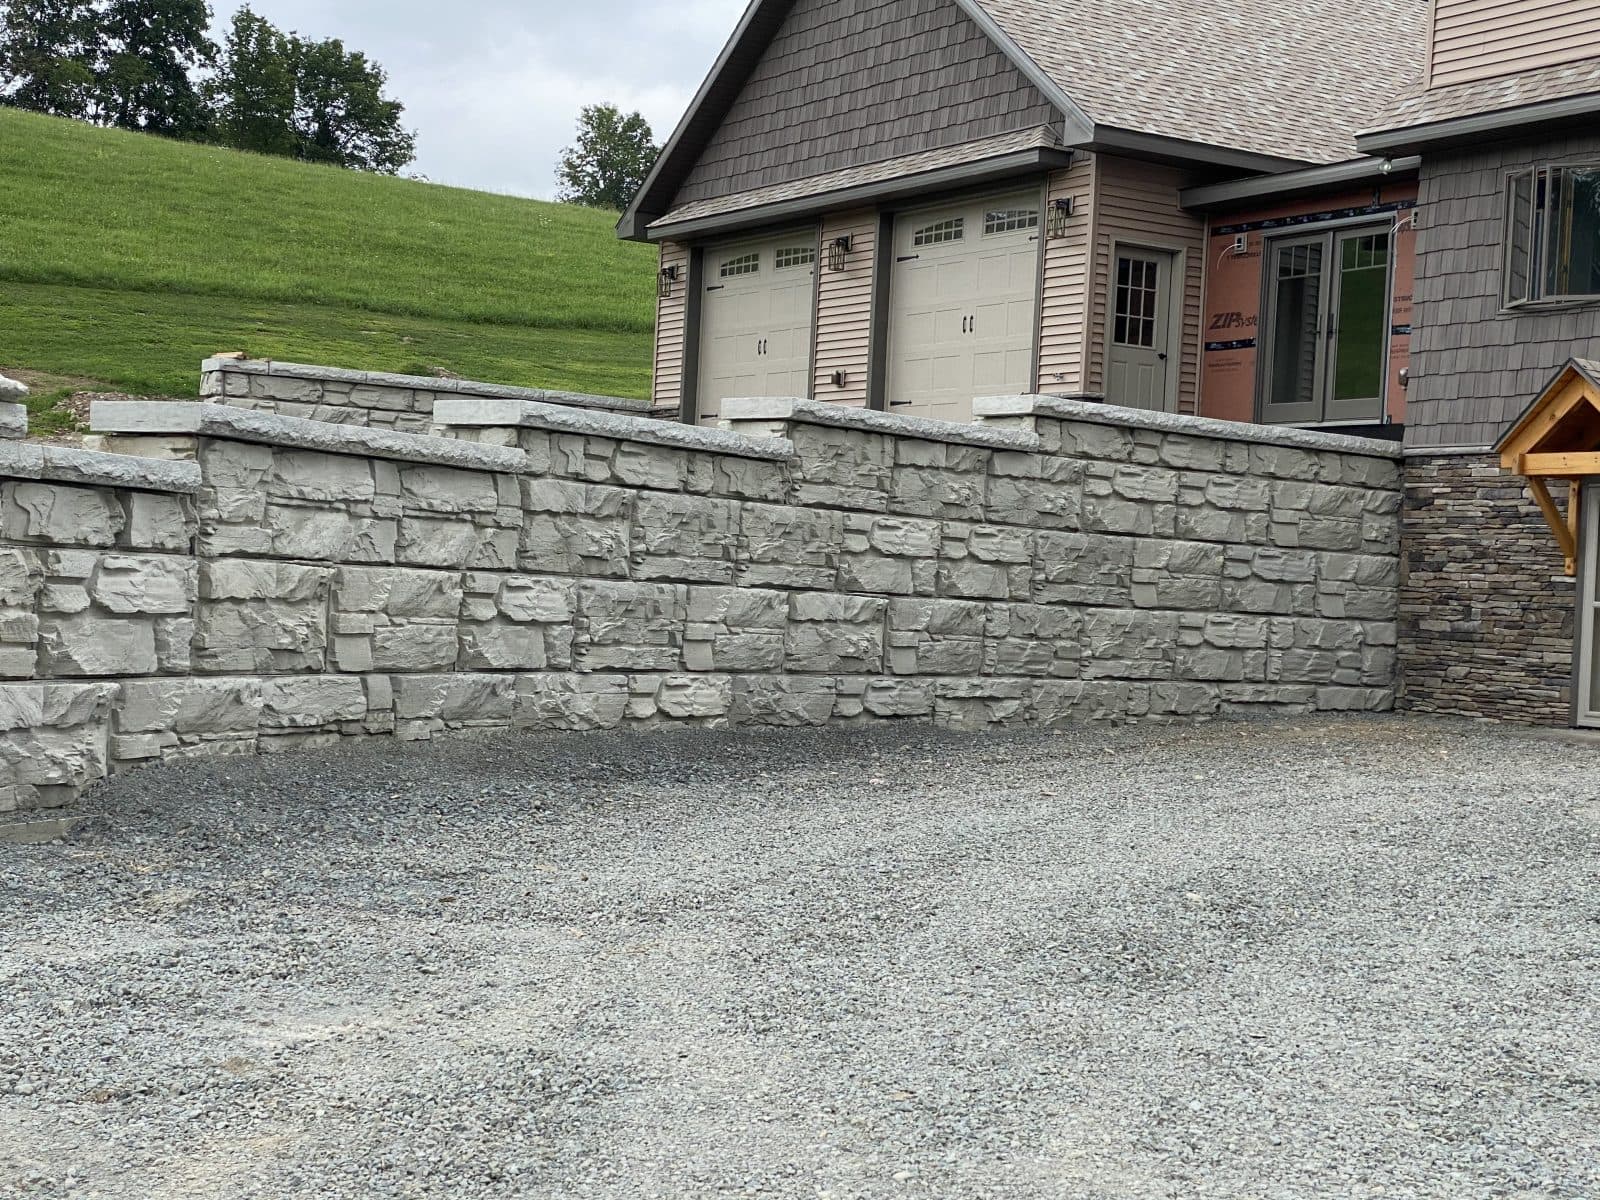 MagnumStone Retaining Wall used to extend a driveway. It features a step-up wall leading up to the home.